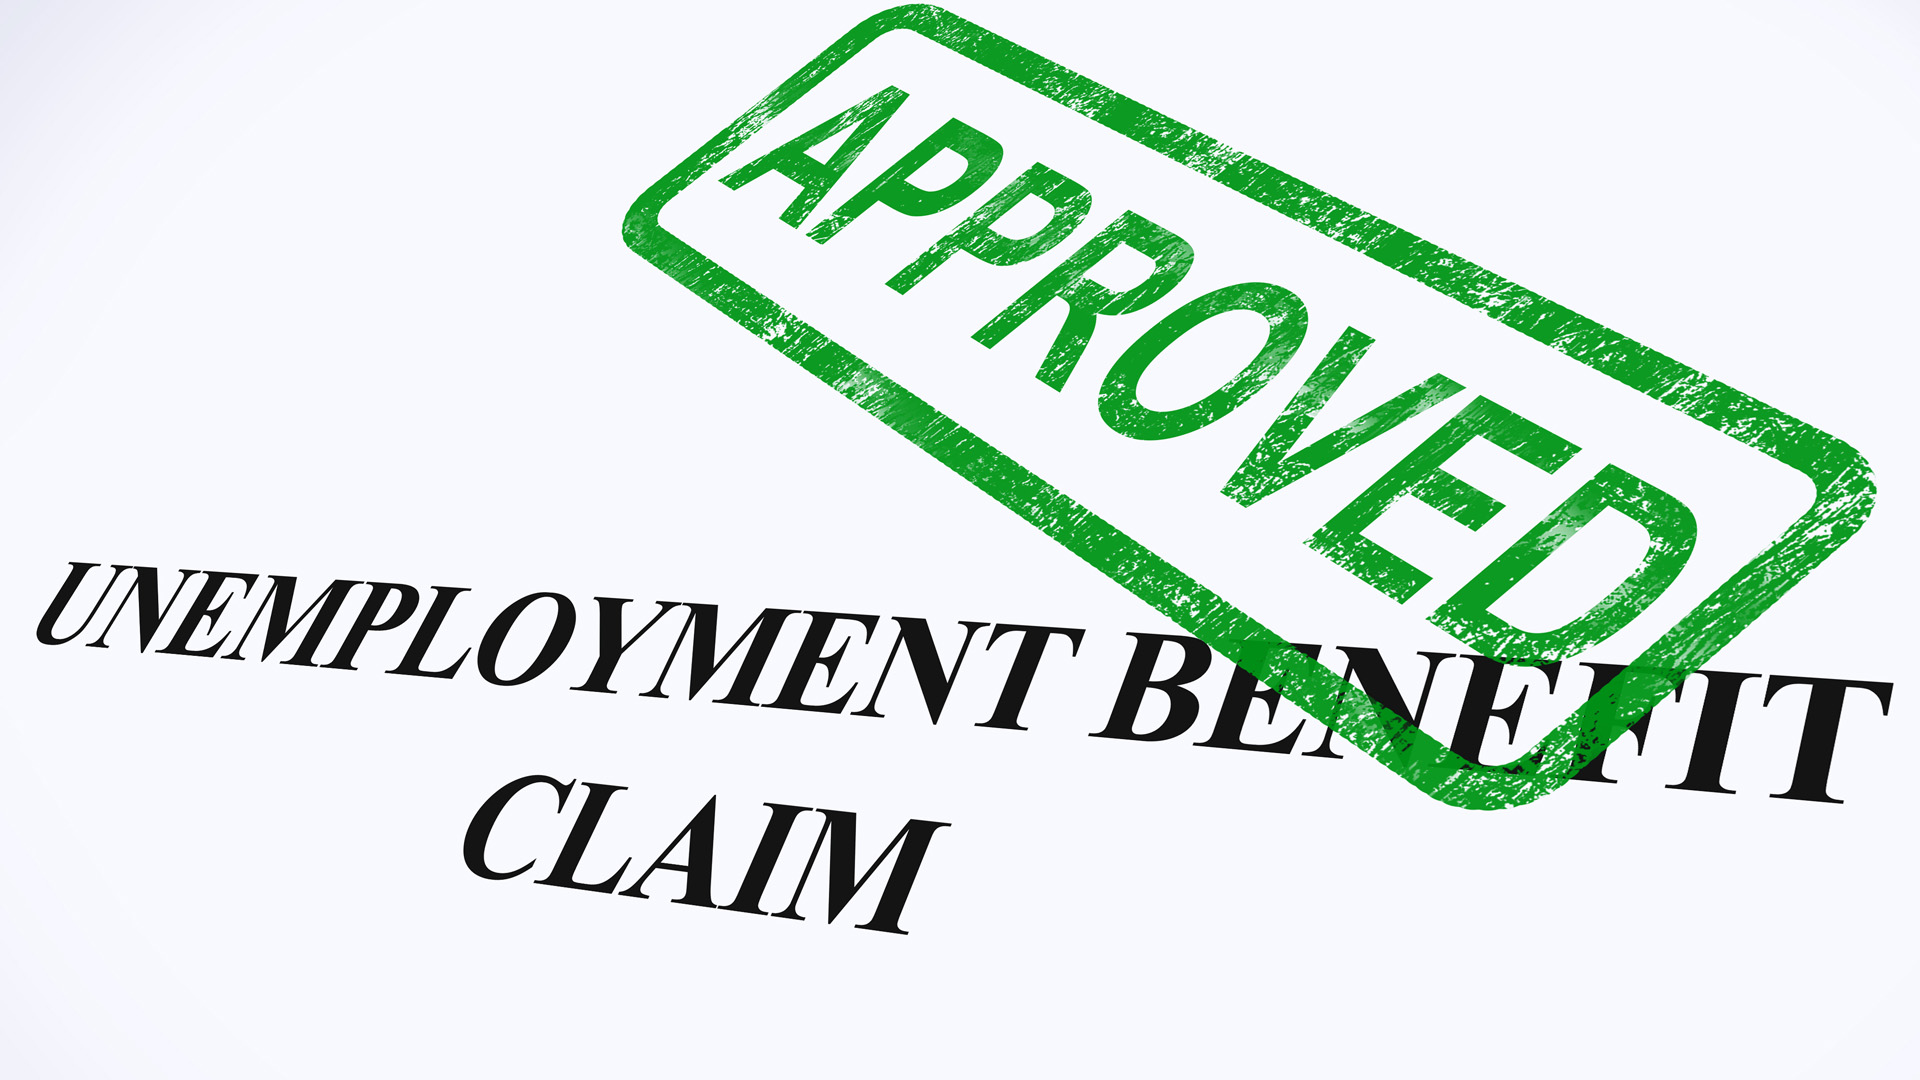 Another 4.34M File for Unemployment Insurance Benefits